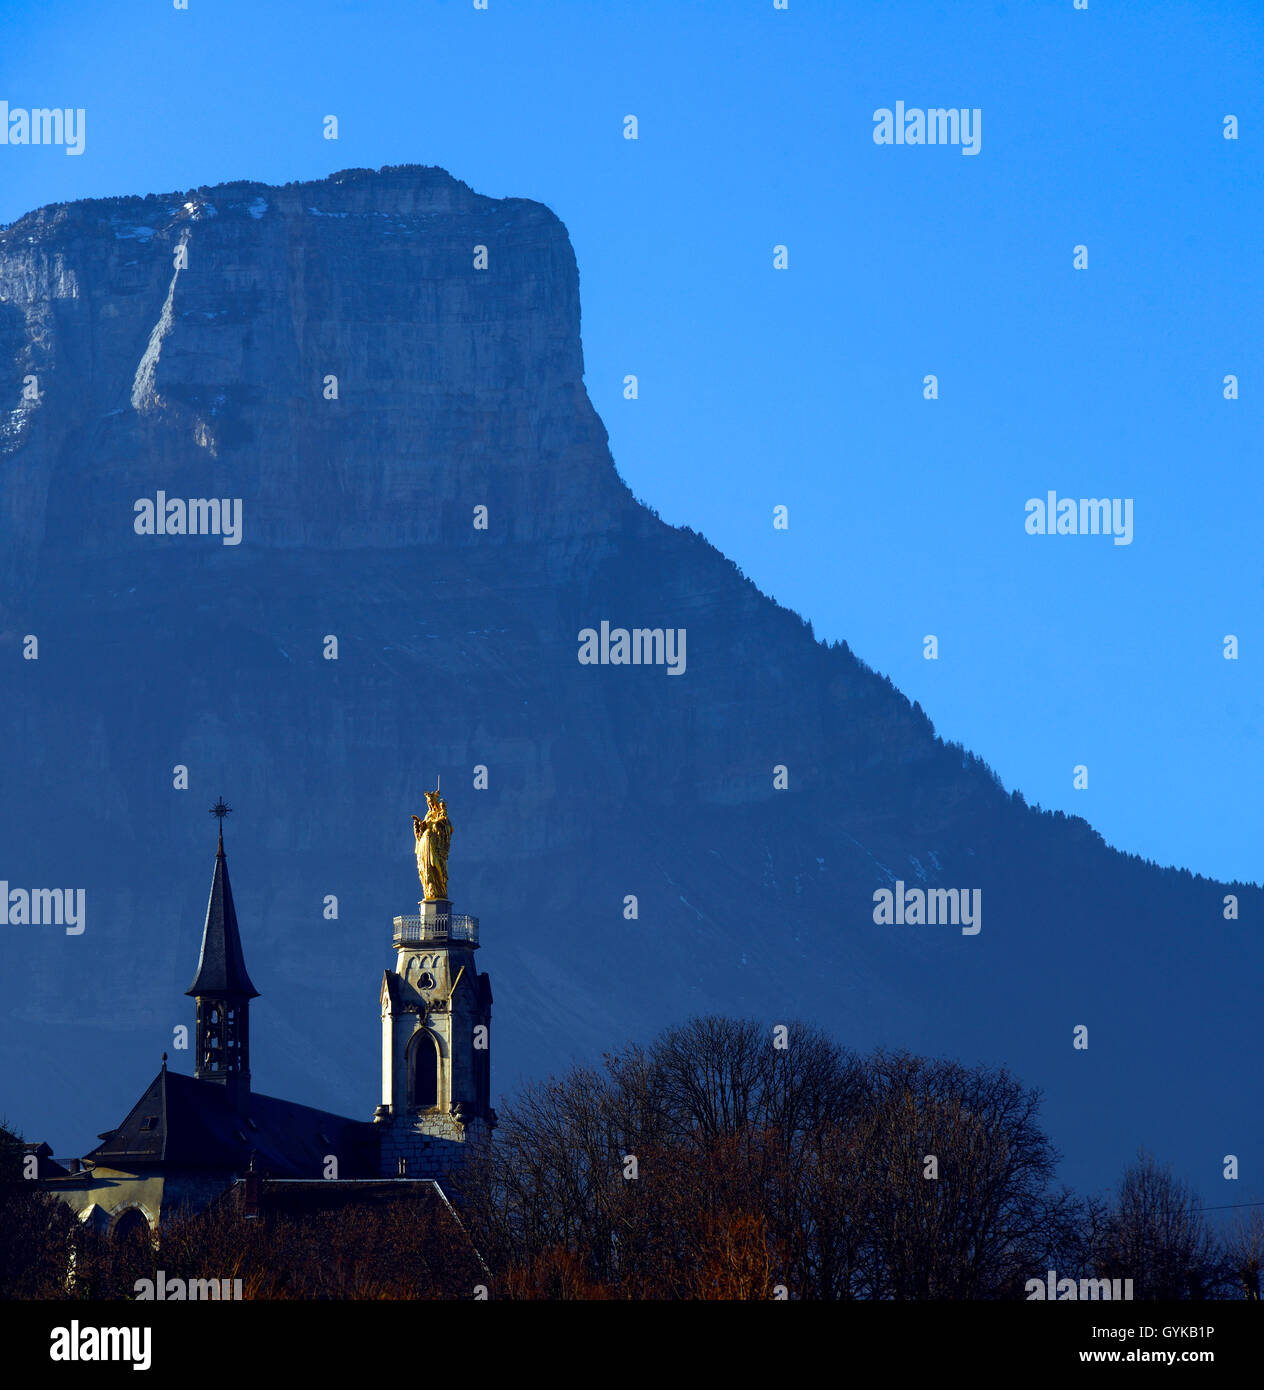 holy figure of the virgin Mary, mountain of Chartreuse in background, France, Chartreuse, Myans Stock Photo